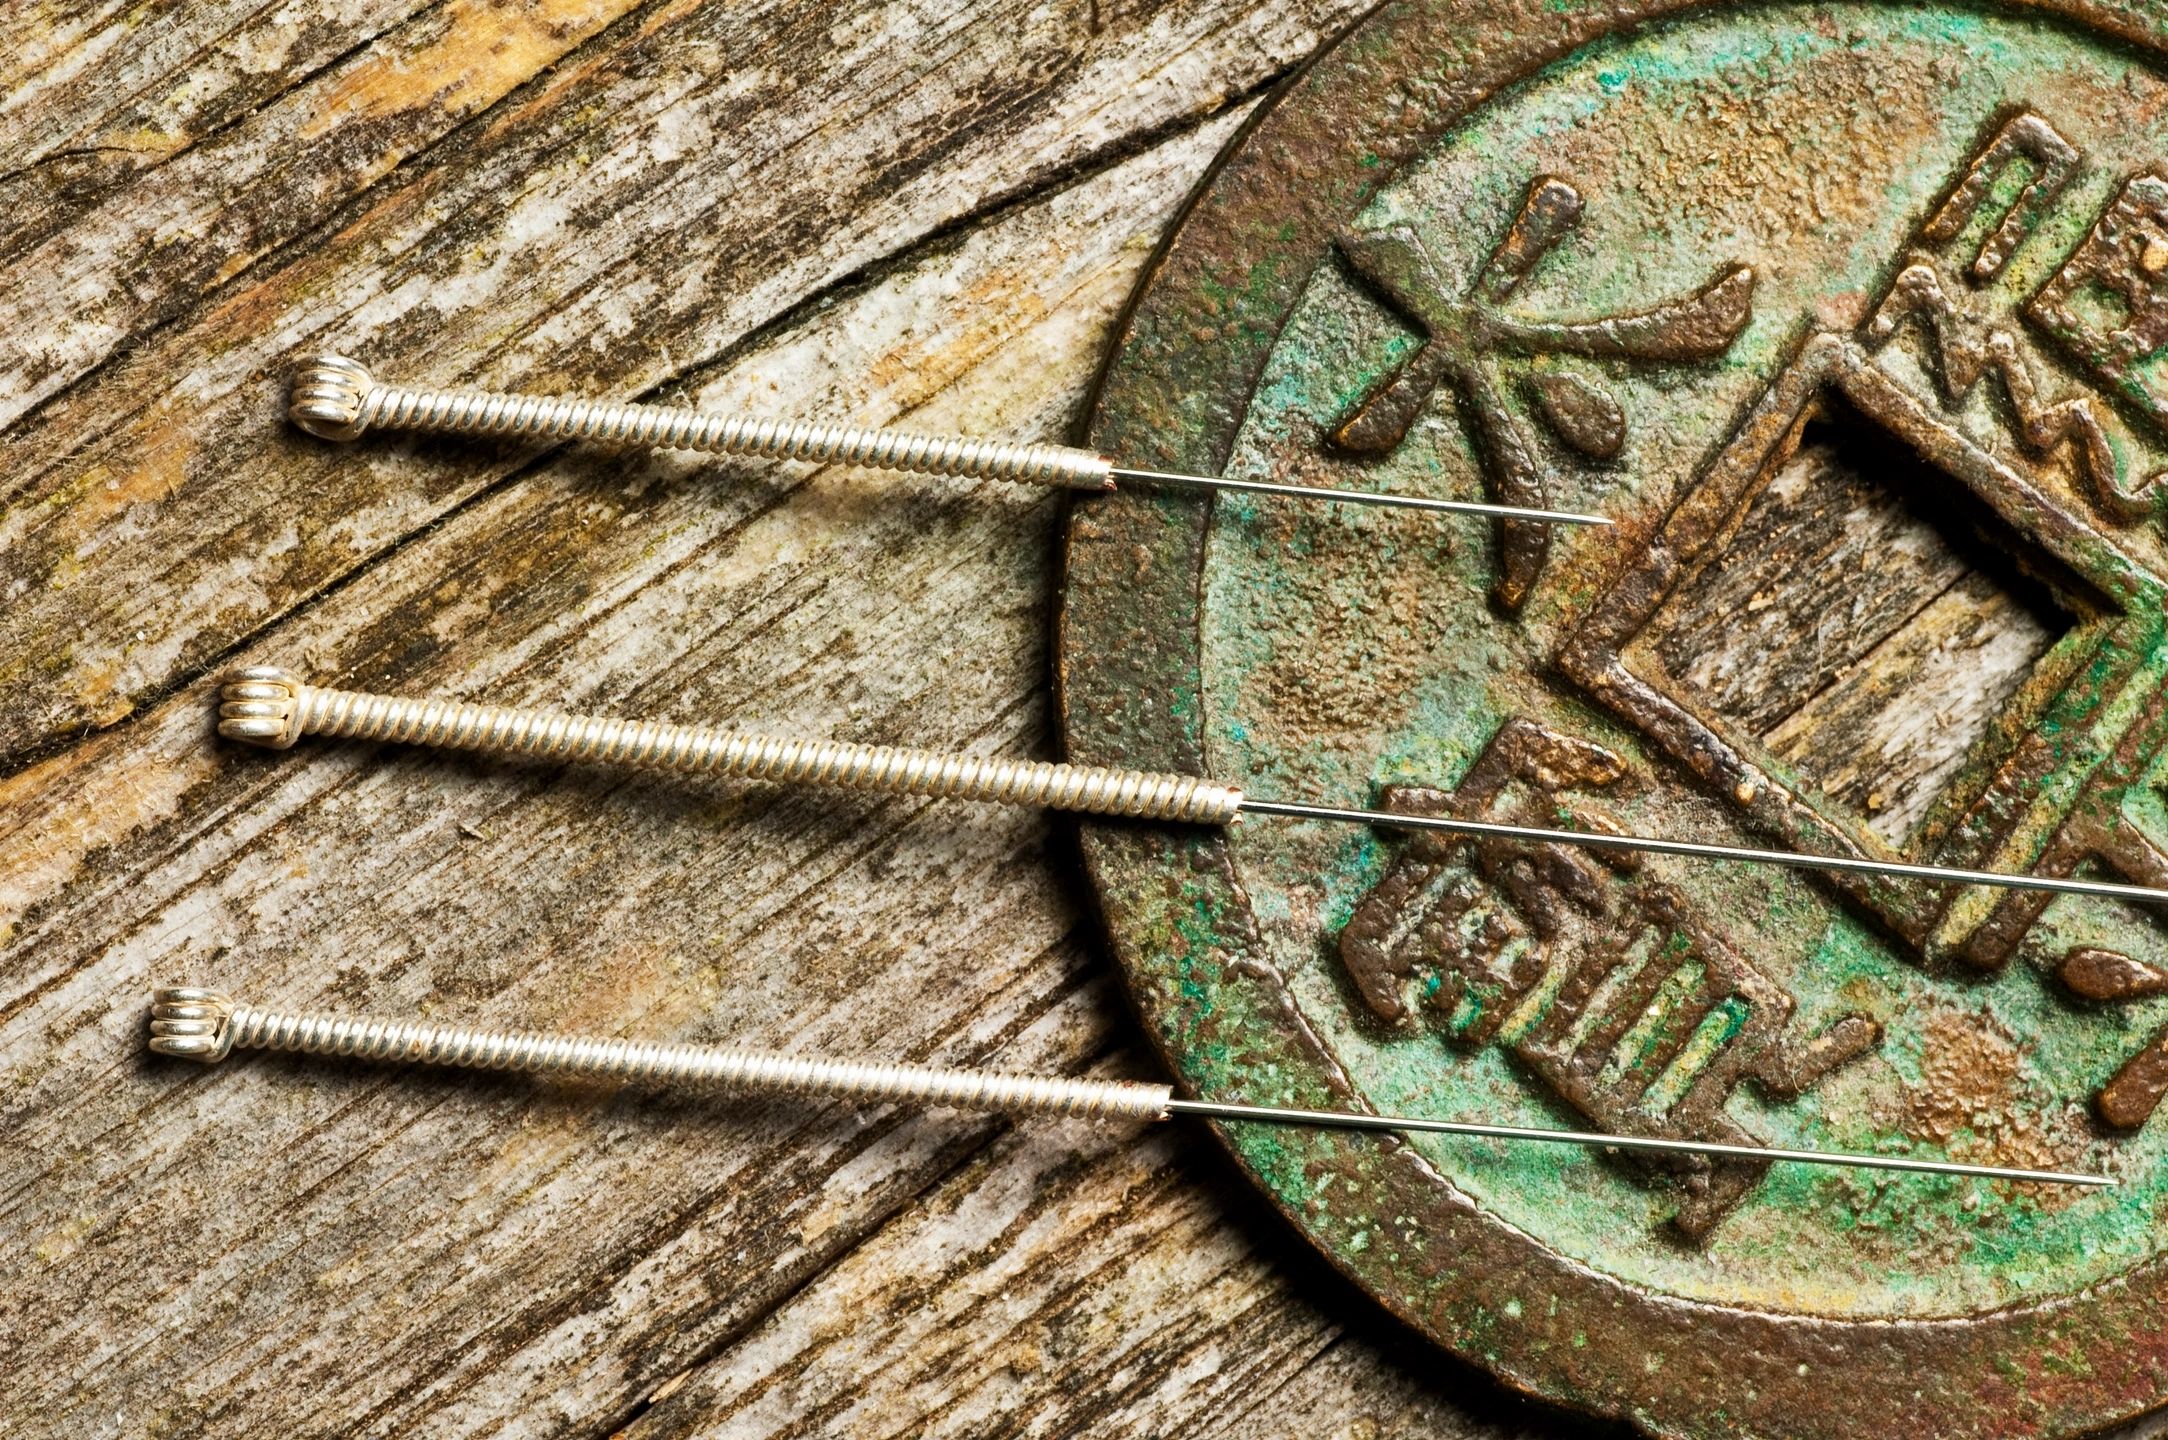 Acupuncture needles next to an old Chinese coin